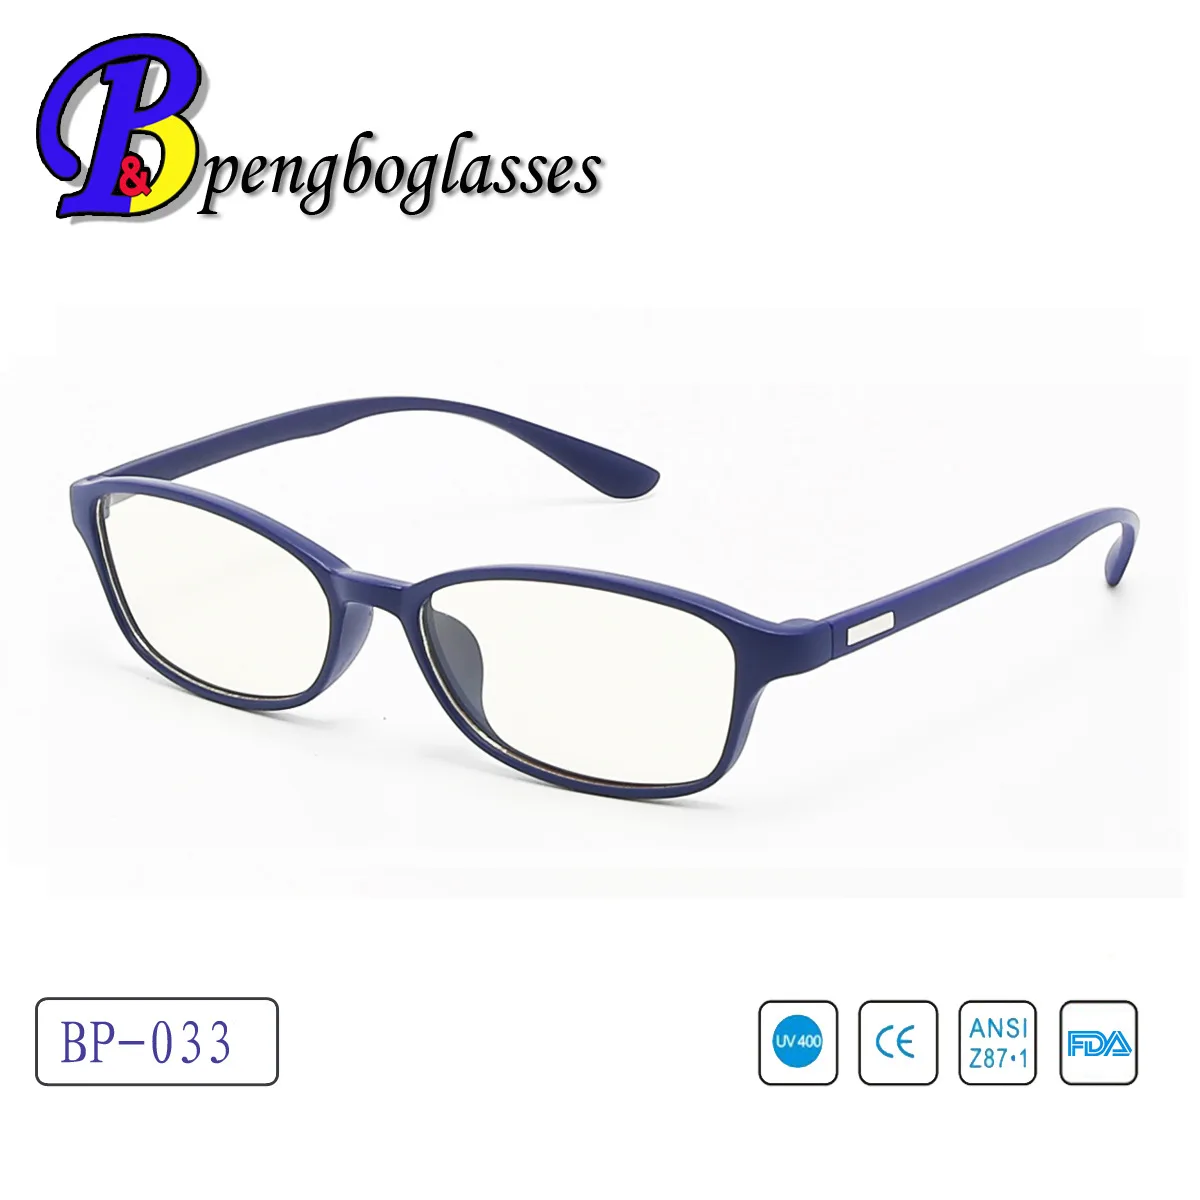 BP negative ion glasses frame computer protection eye goggles